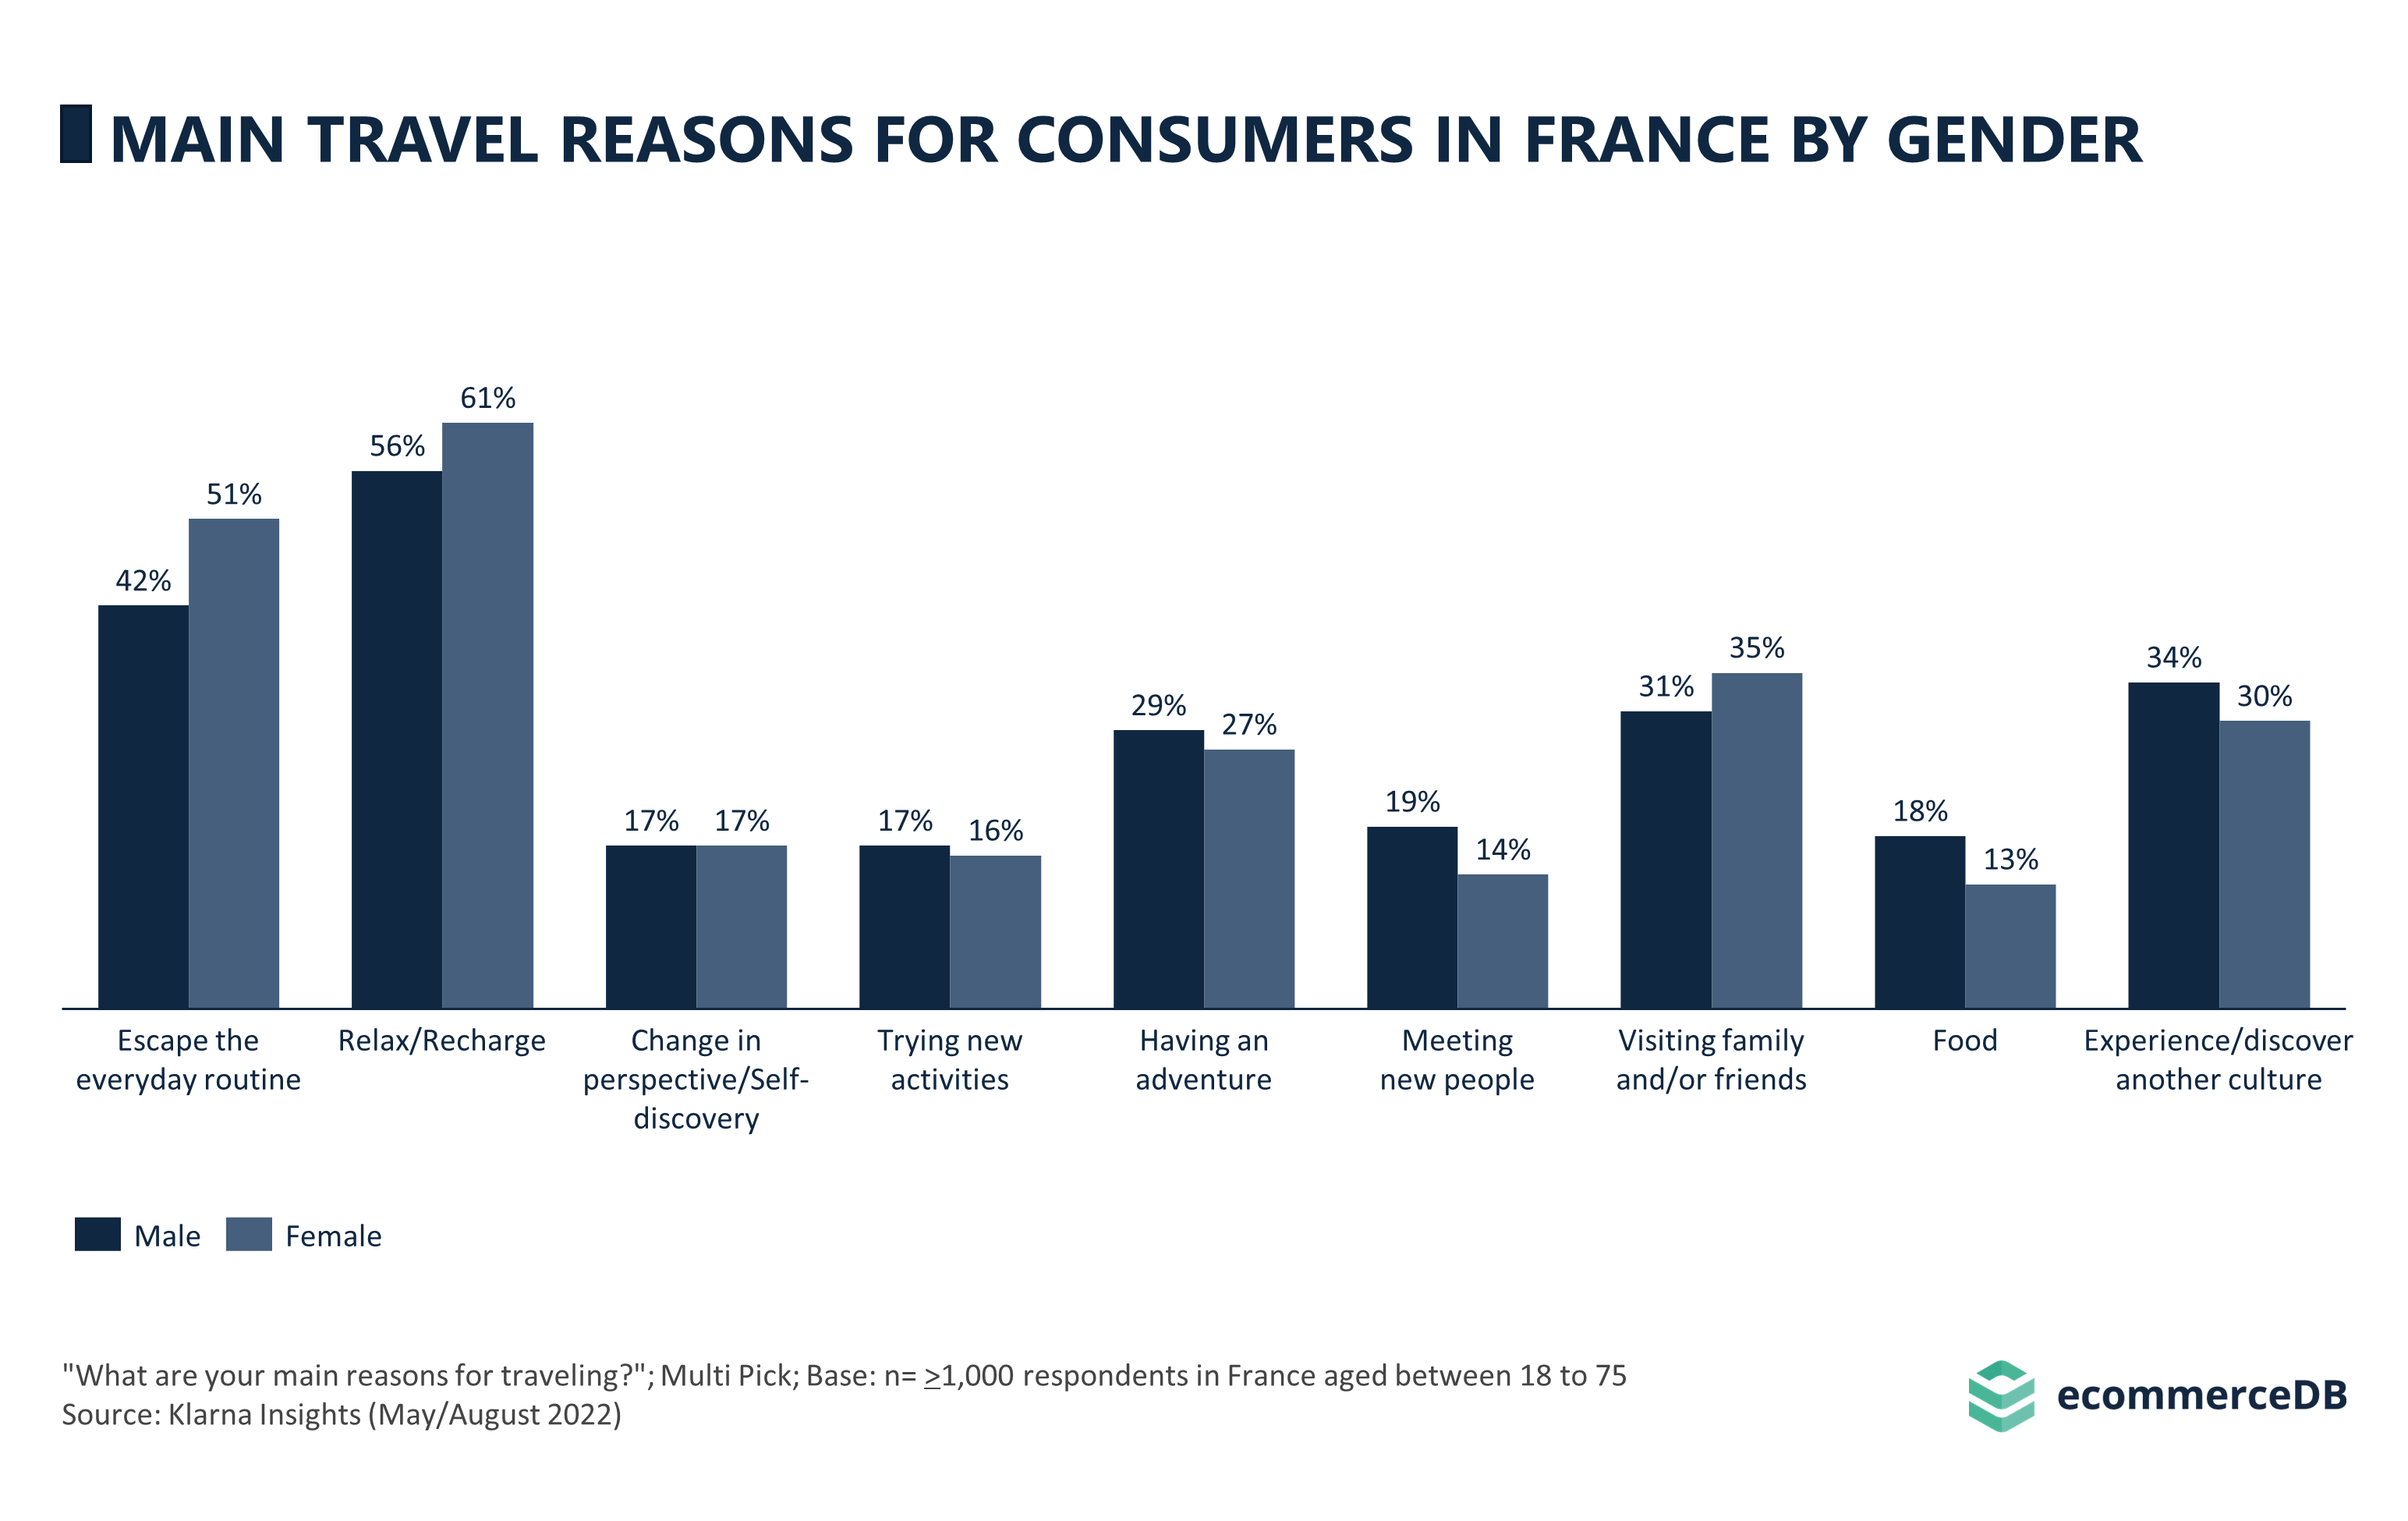 Main Travel Reasons for Consumers in France by Gender